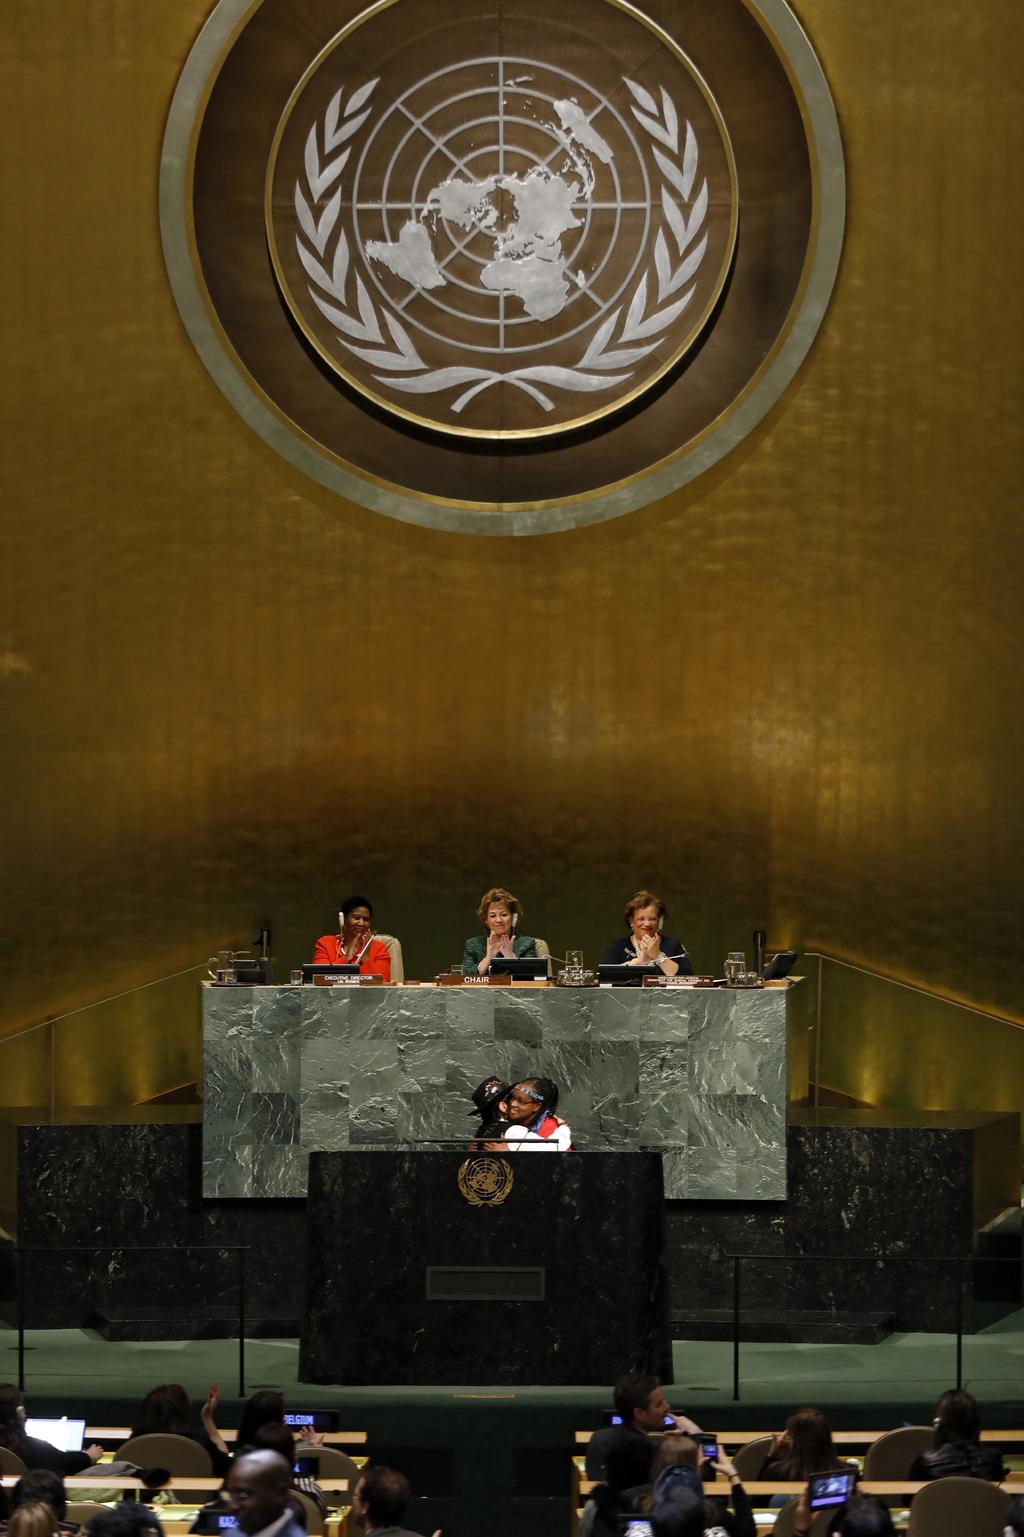 w h y i r e l a n d Independence The Permanent Representative of Ireland, Geraldine Byrne Nason, chairing the sixty-second session of the Commission on the Status of Women at UNHQ, New York, in March